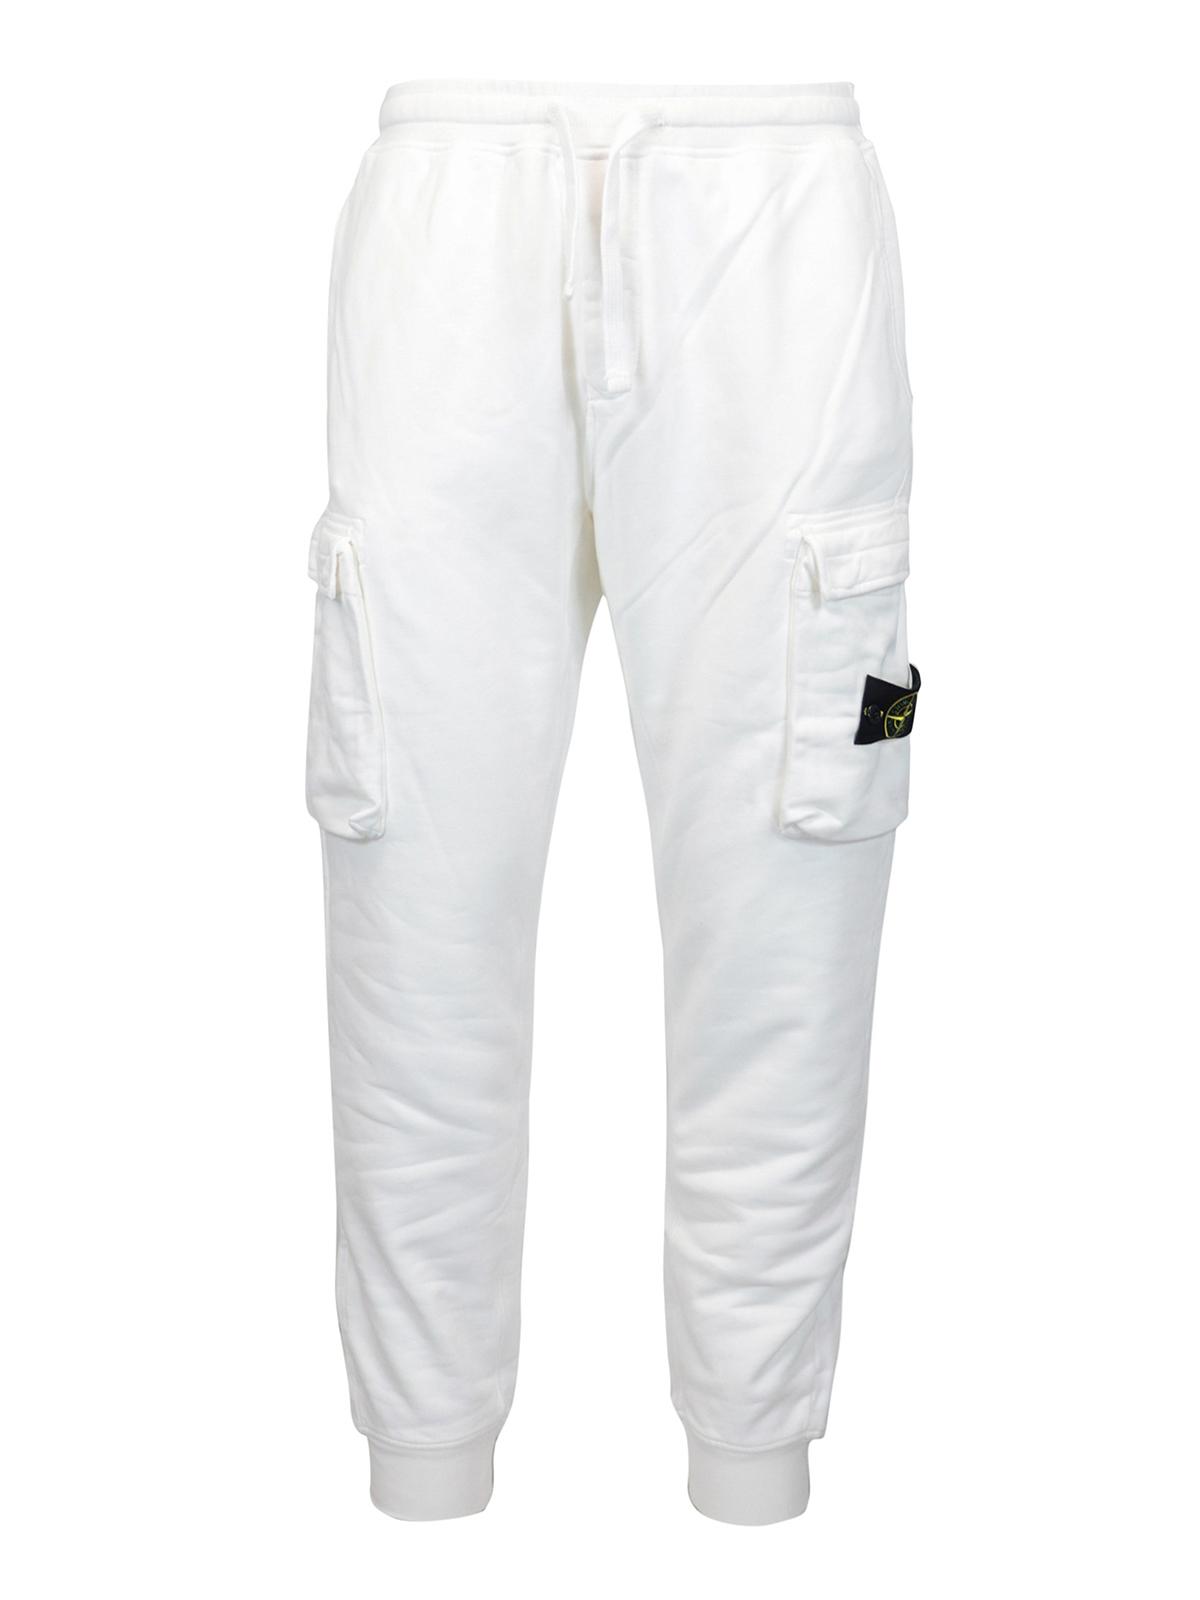 Stone Island Cotton Logo Label Cargo joggers in White for Men - Lyst